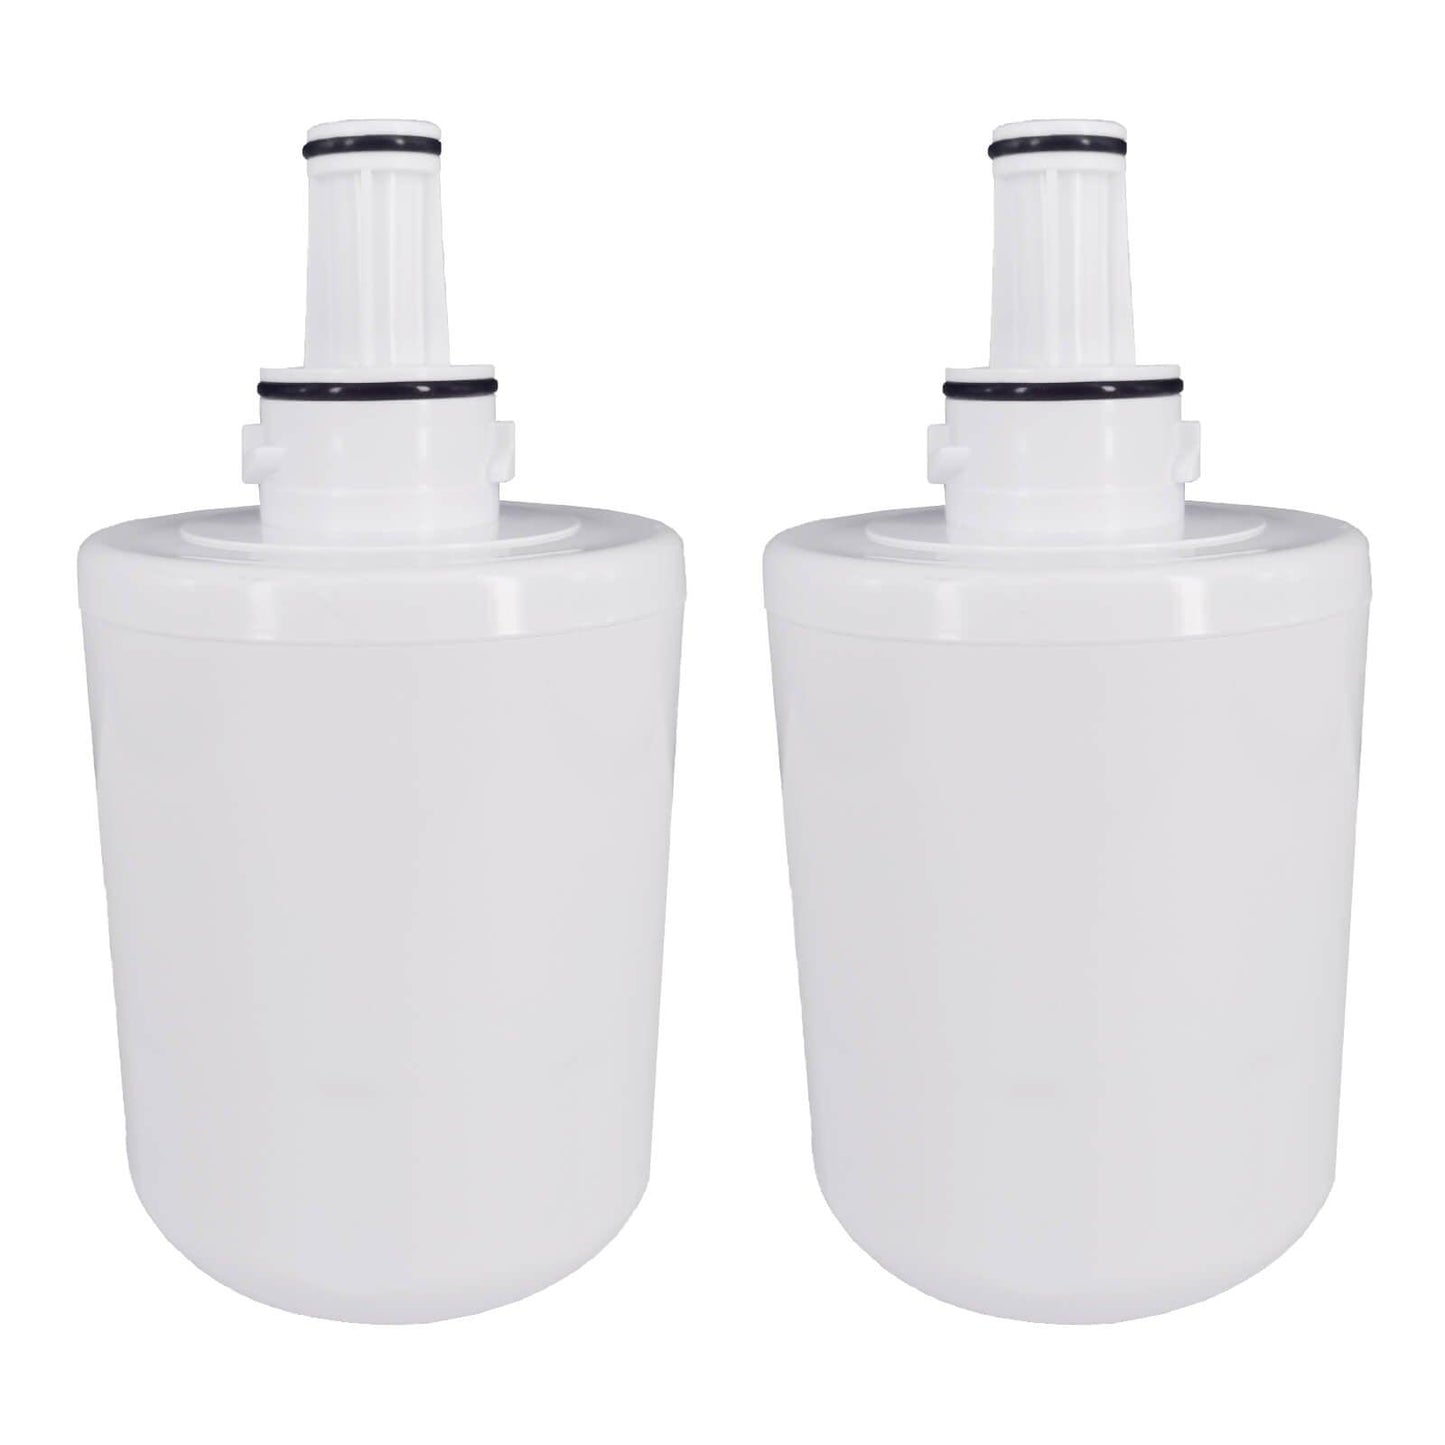 2X Compatible Water Filter For Samsung RFG23UEBP RFG23UERS SRF639GDSS Sparesbarn